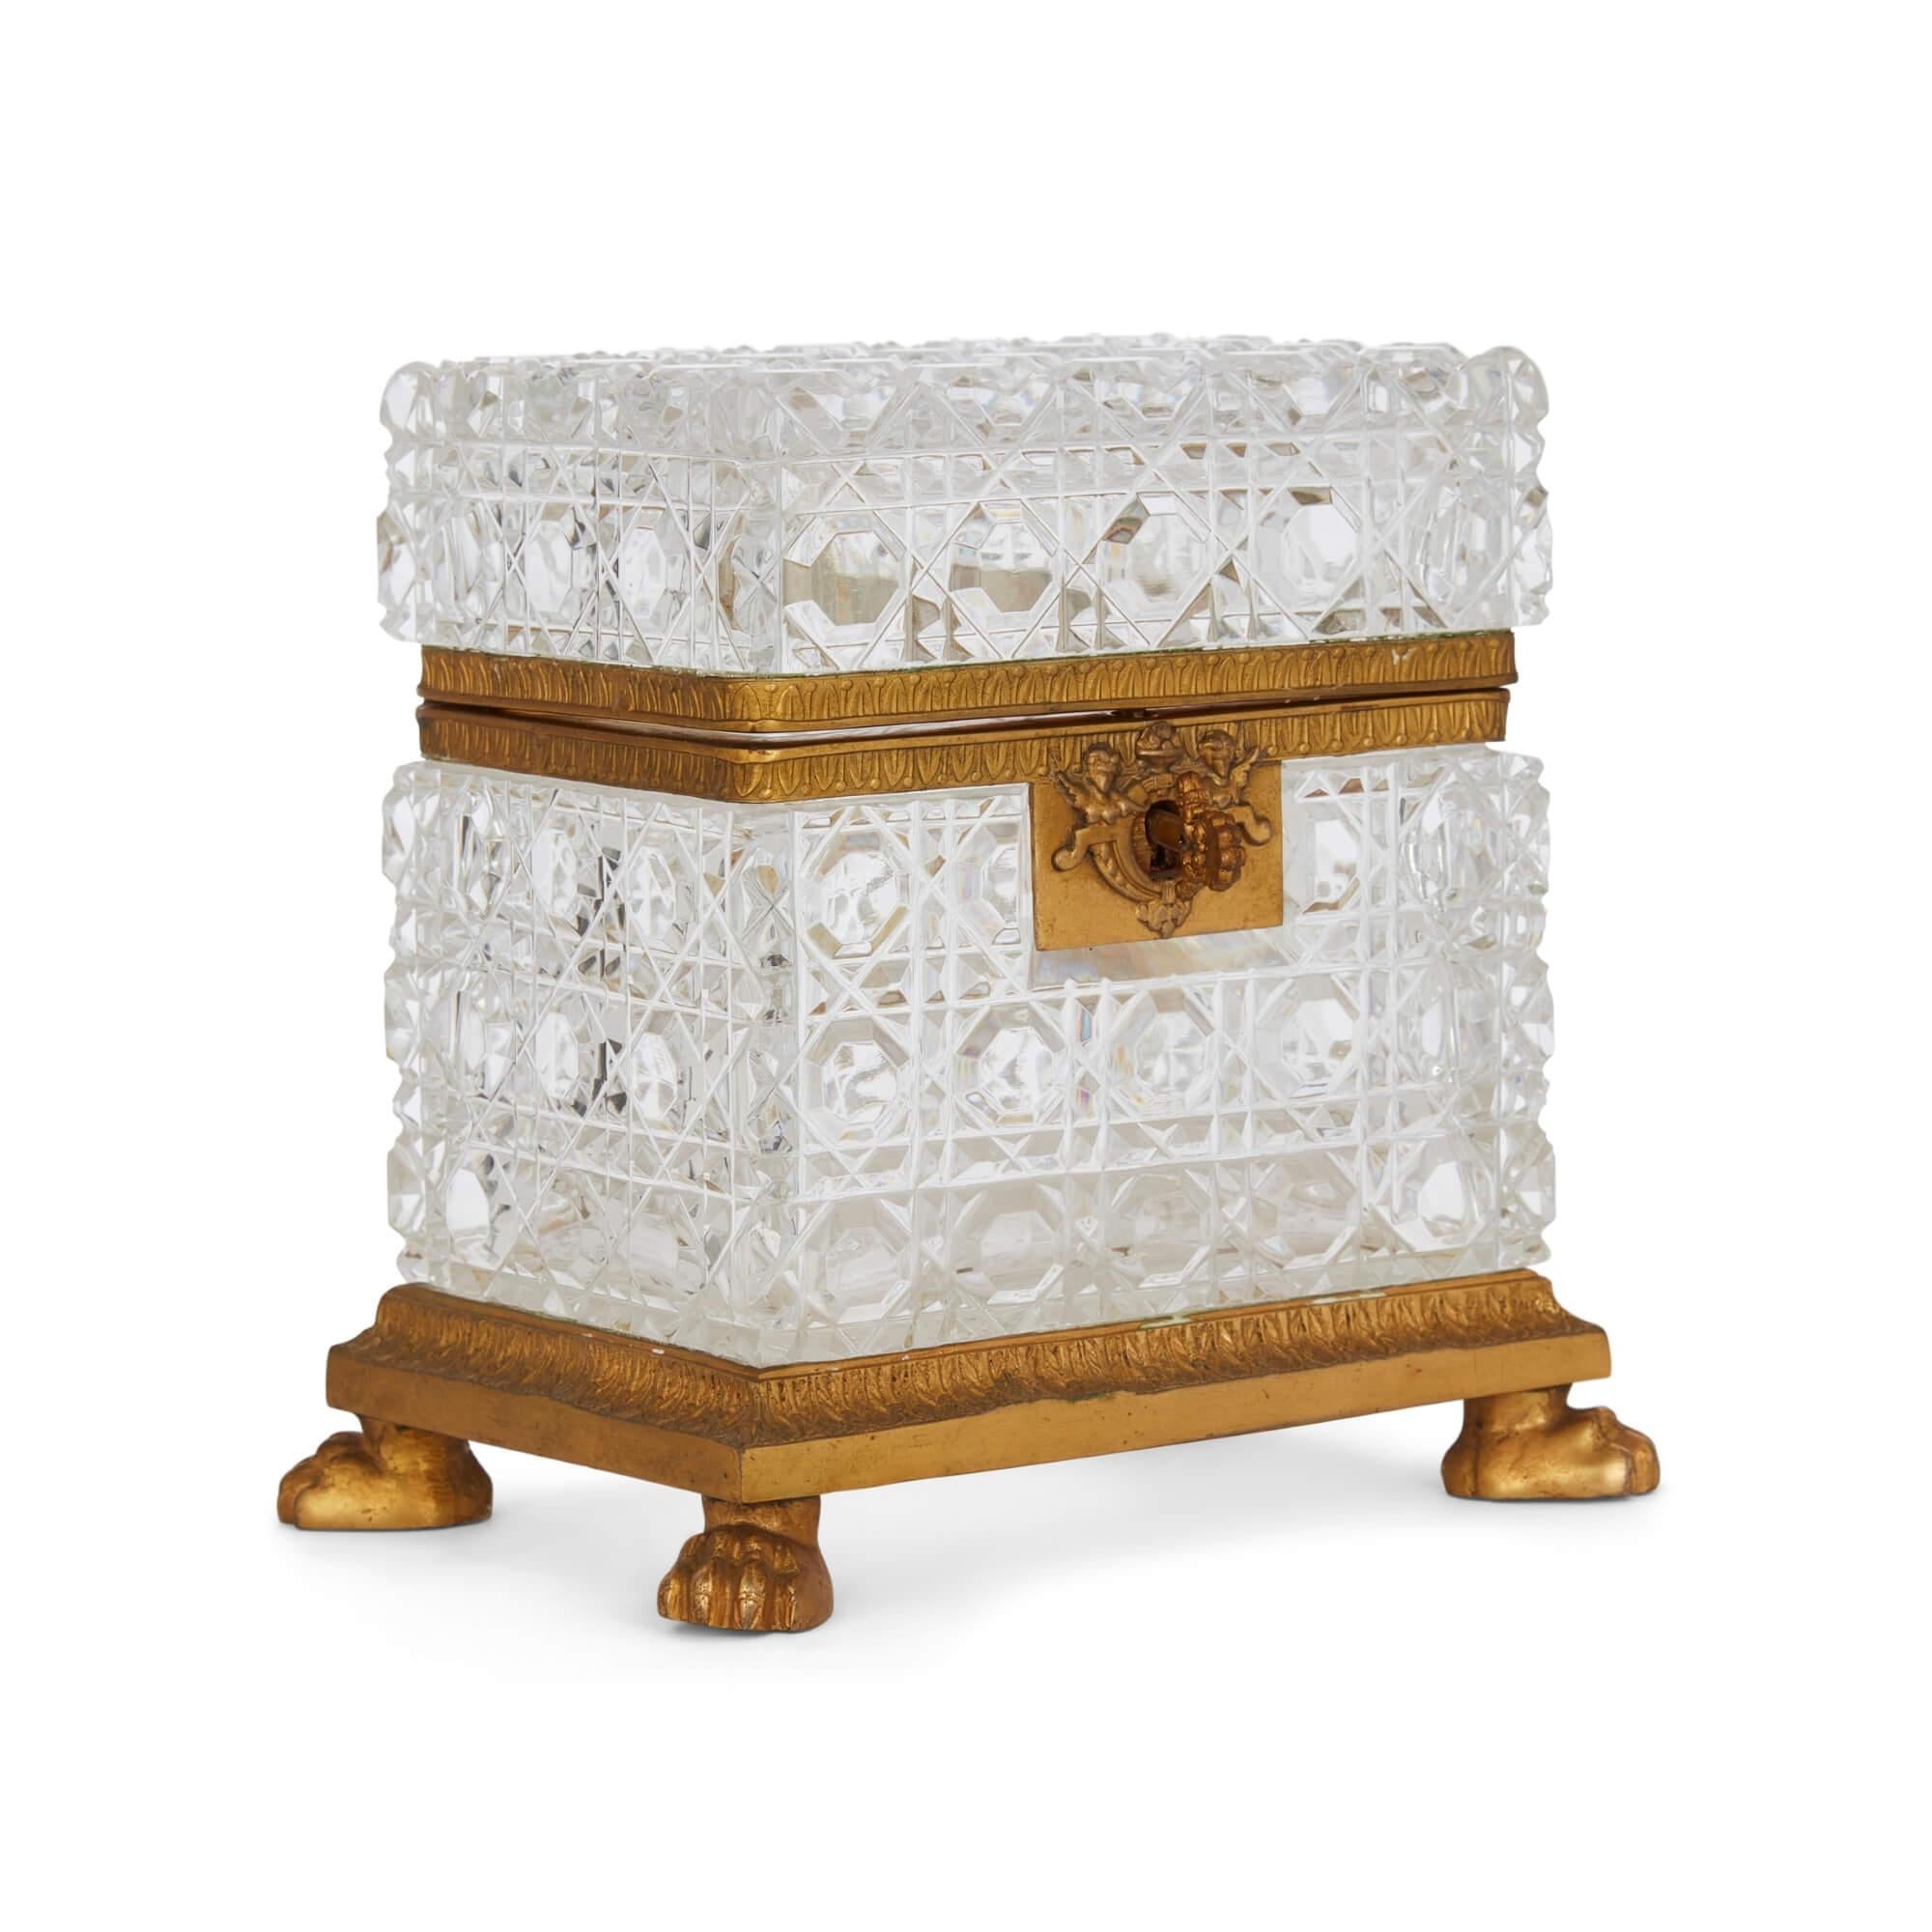 Antique ormolu and cut-crystal casket by Baccarat
French, 19th Century
Height 15cm, width 14.5cm, depth 11cm

This exquisite box is by the renowned French maker Baccarat. Since 1764, Baccarat have crafted superb glass pieces for an elite clientele,